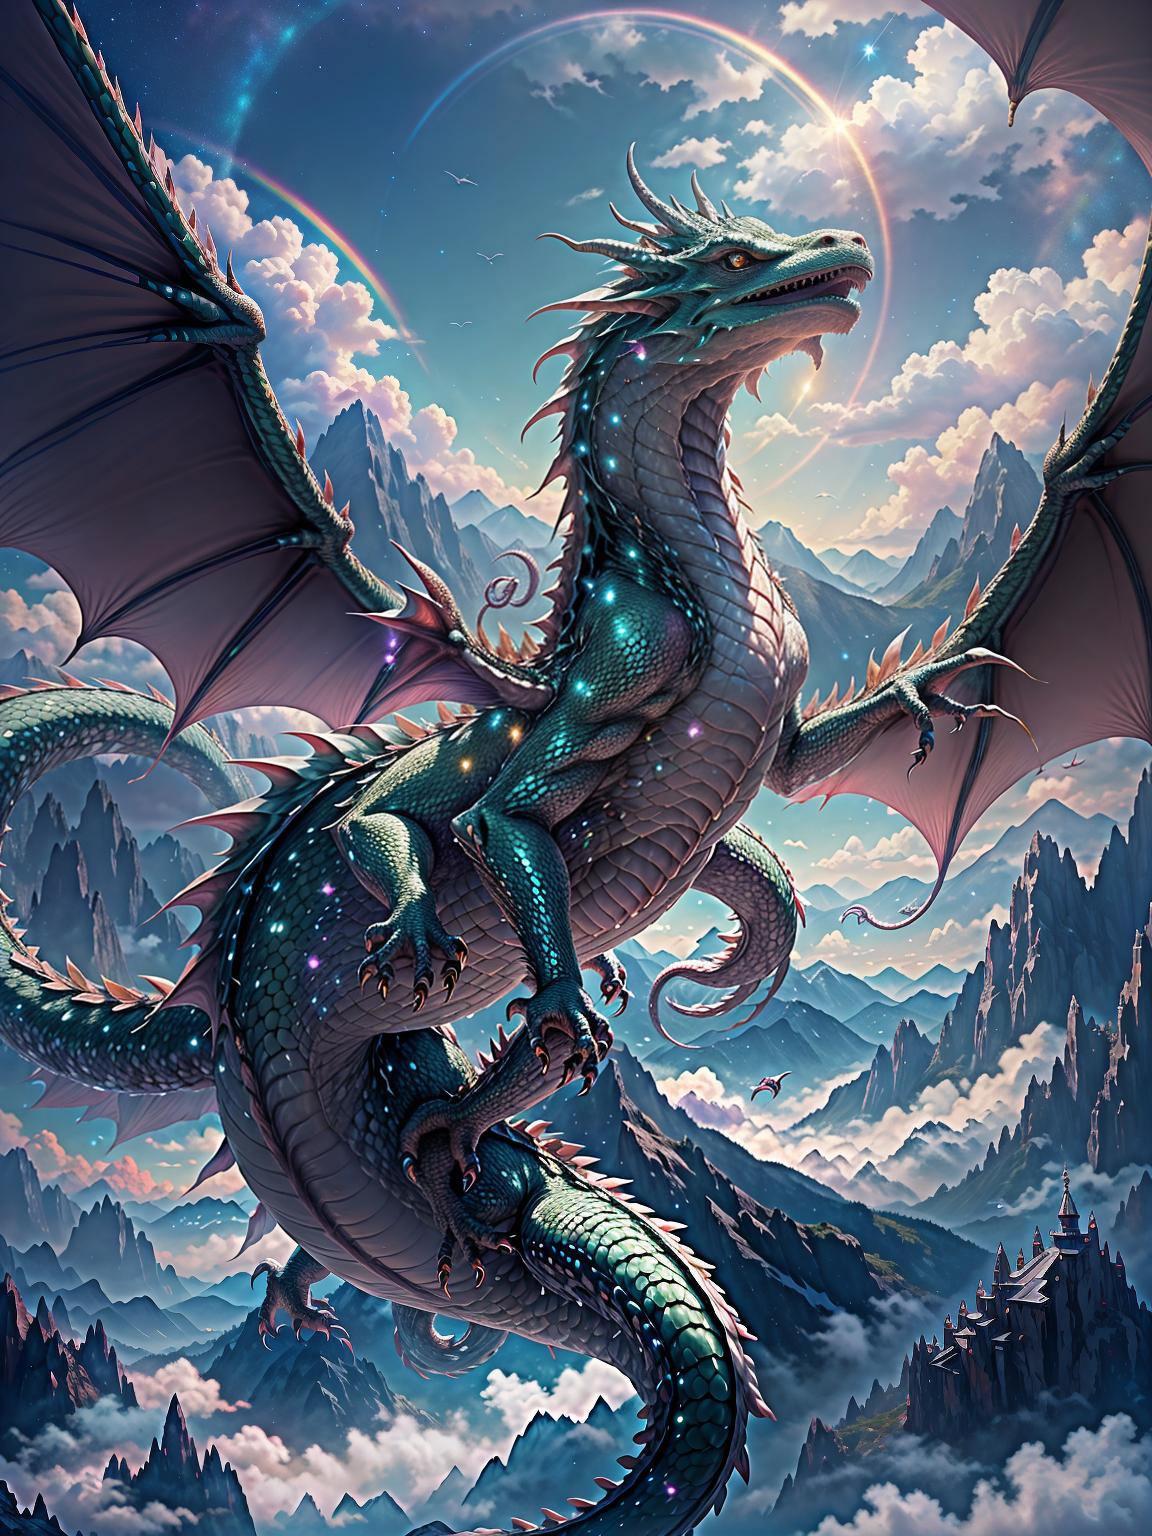  master piece, best quality, ultra detailed, highres, 4k.8k, White Dragon, Wriggling towards the sky, Serene, BREAK Dragon's Dream, Rainbow filled sky, Clouds, Rainbow, Stars, Mountains, BREAK Magical and serene, Dreamy and ethereal appearance, creature00d,crystallineAI